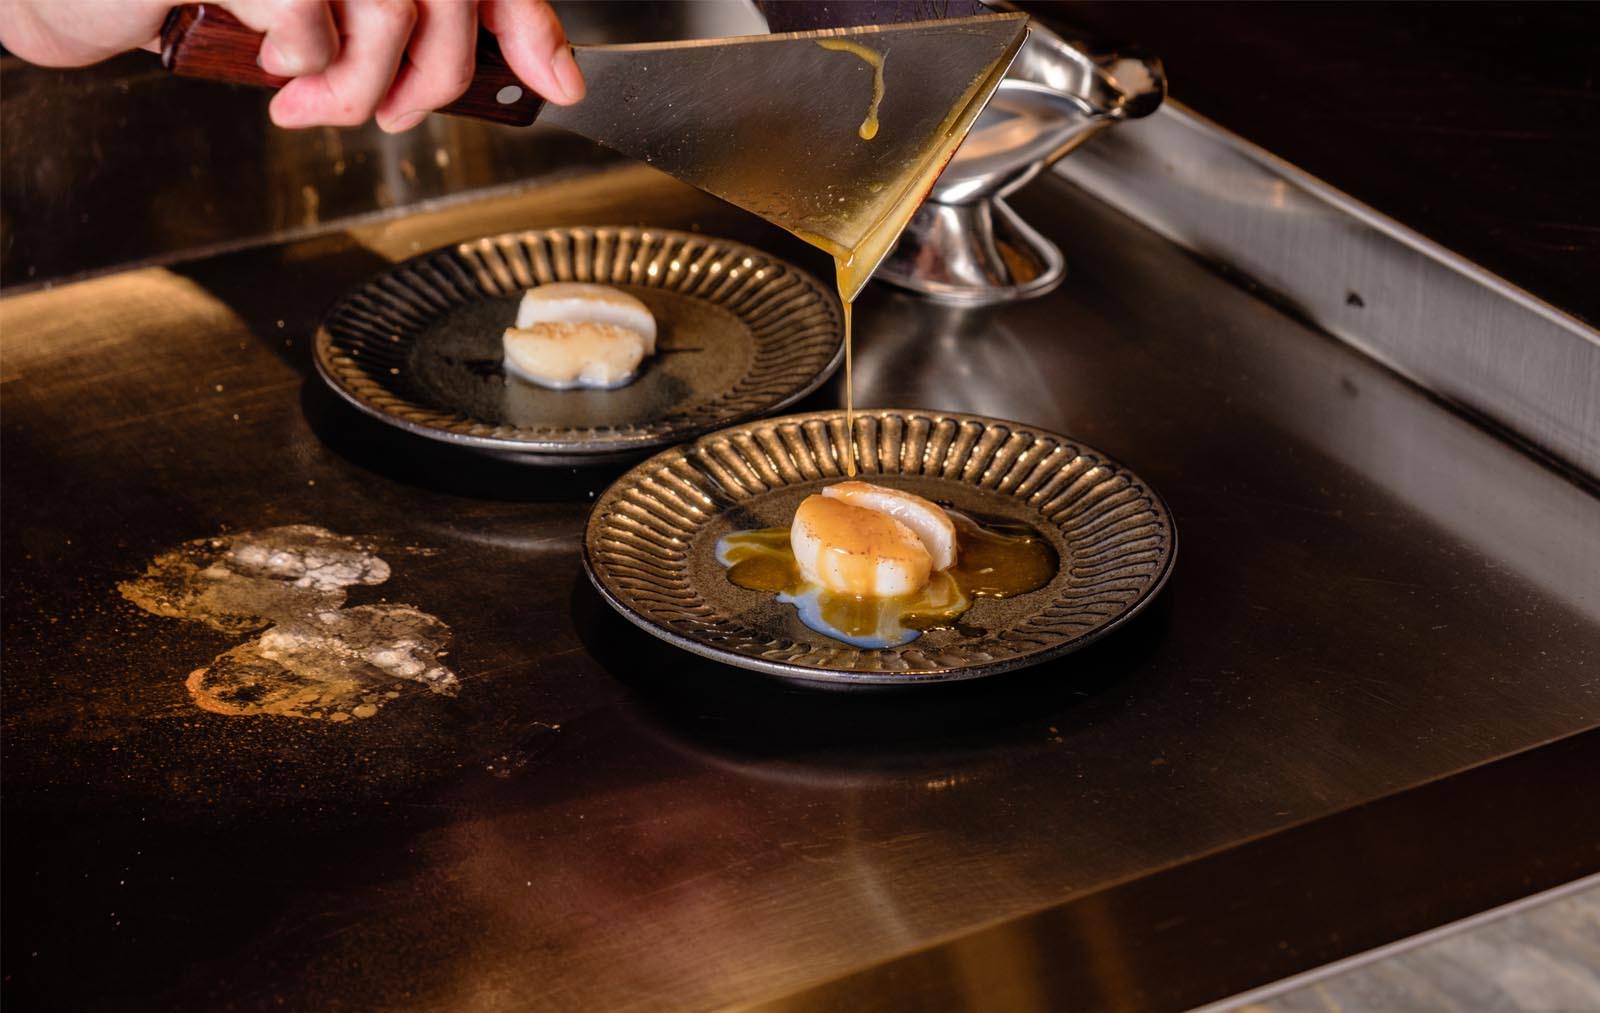 Things to do in Hong Kong in March include eating fresh Hokkaido scallops at Crown Super Deluxe